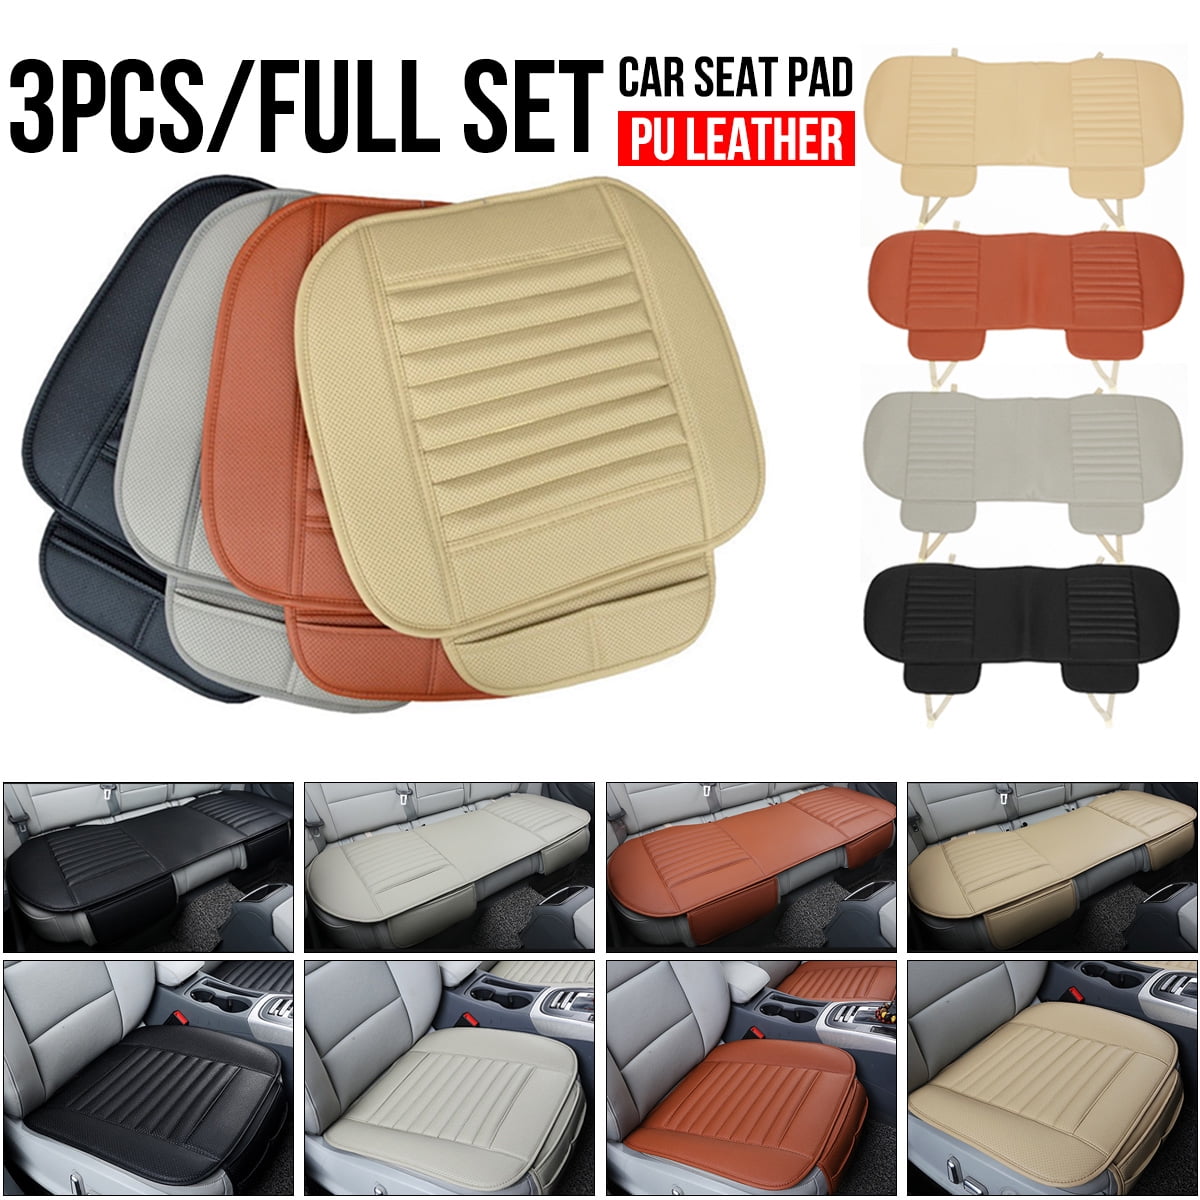 Universal Rear Car Seat Cover Breathable PU Leather Cushion Pad Mat All Seasons